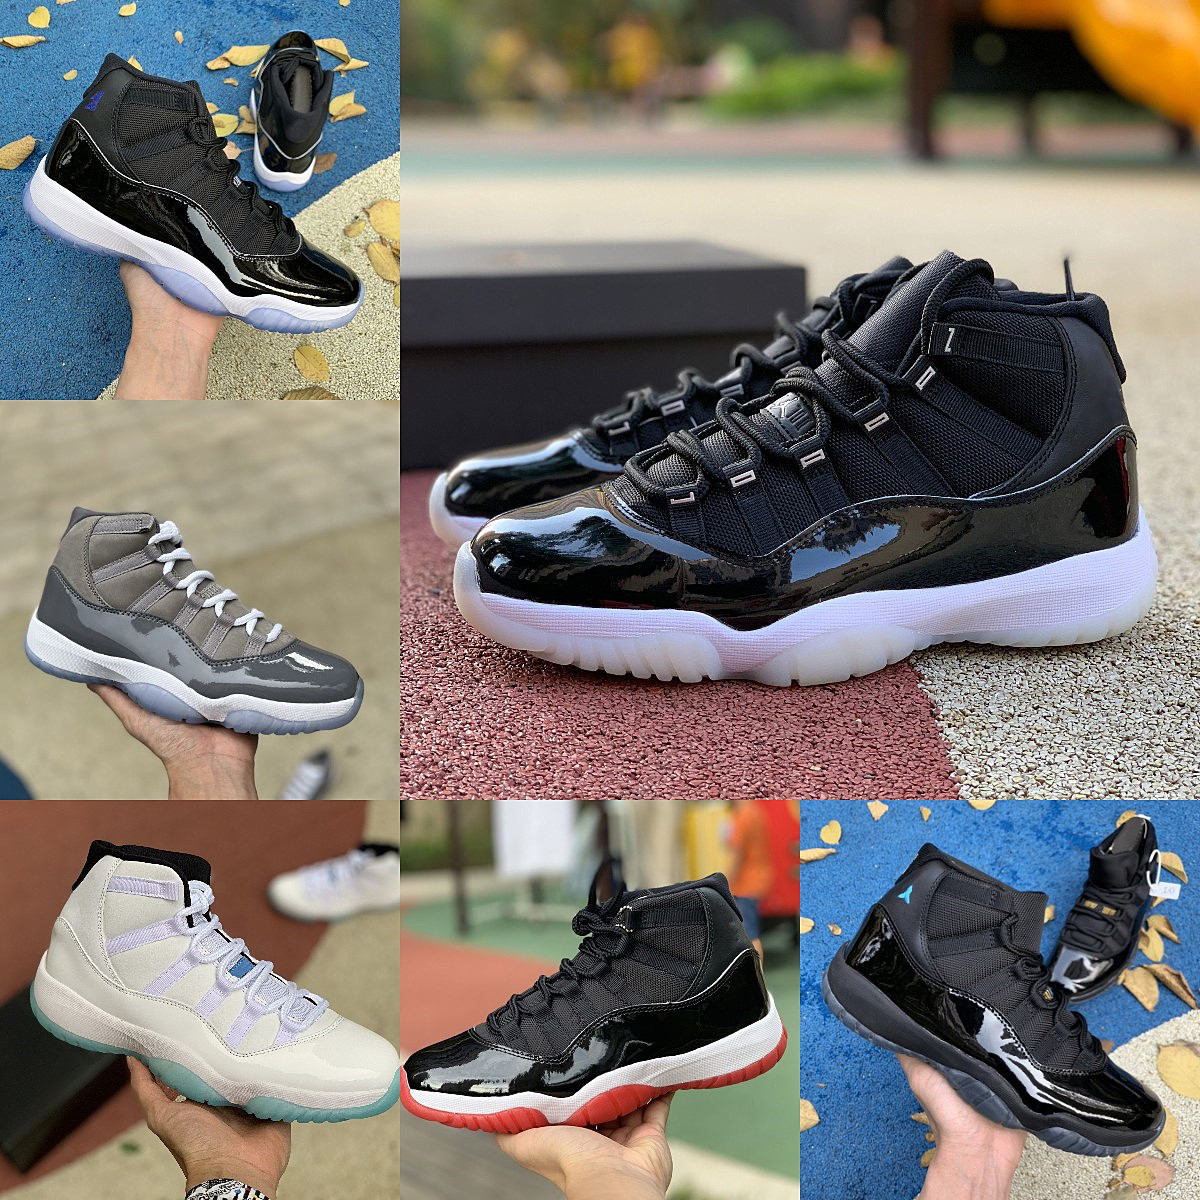 

Jumpman Jubilee 11 11s High Basketball Shoes COOL GREY Legend Blue Playoffs Bred Space Jam Gamma Blue Concord 45 Low Columbia White Red Easter Trainer Sneakers S19, Please contact us